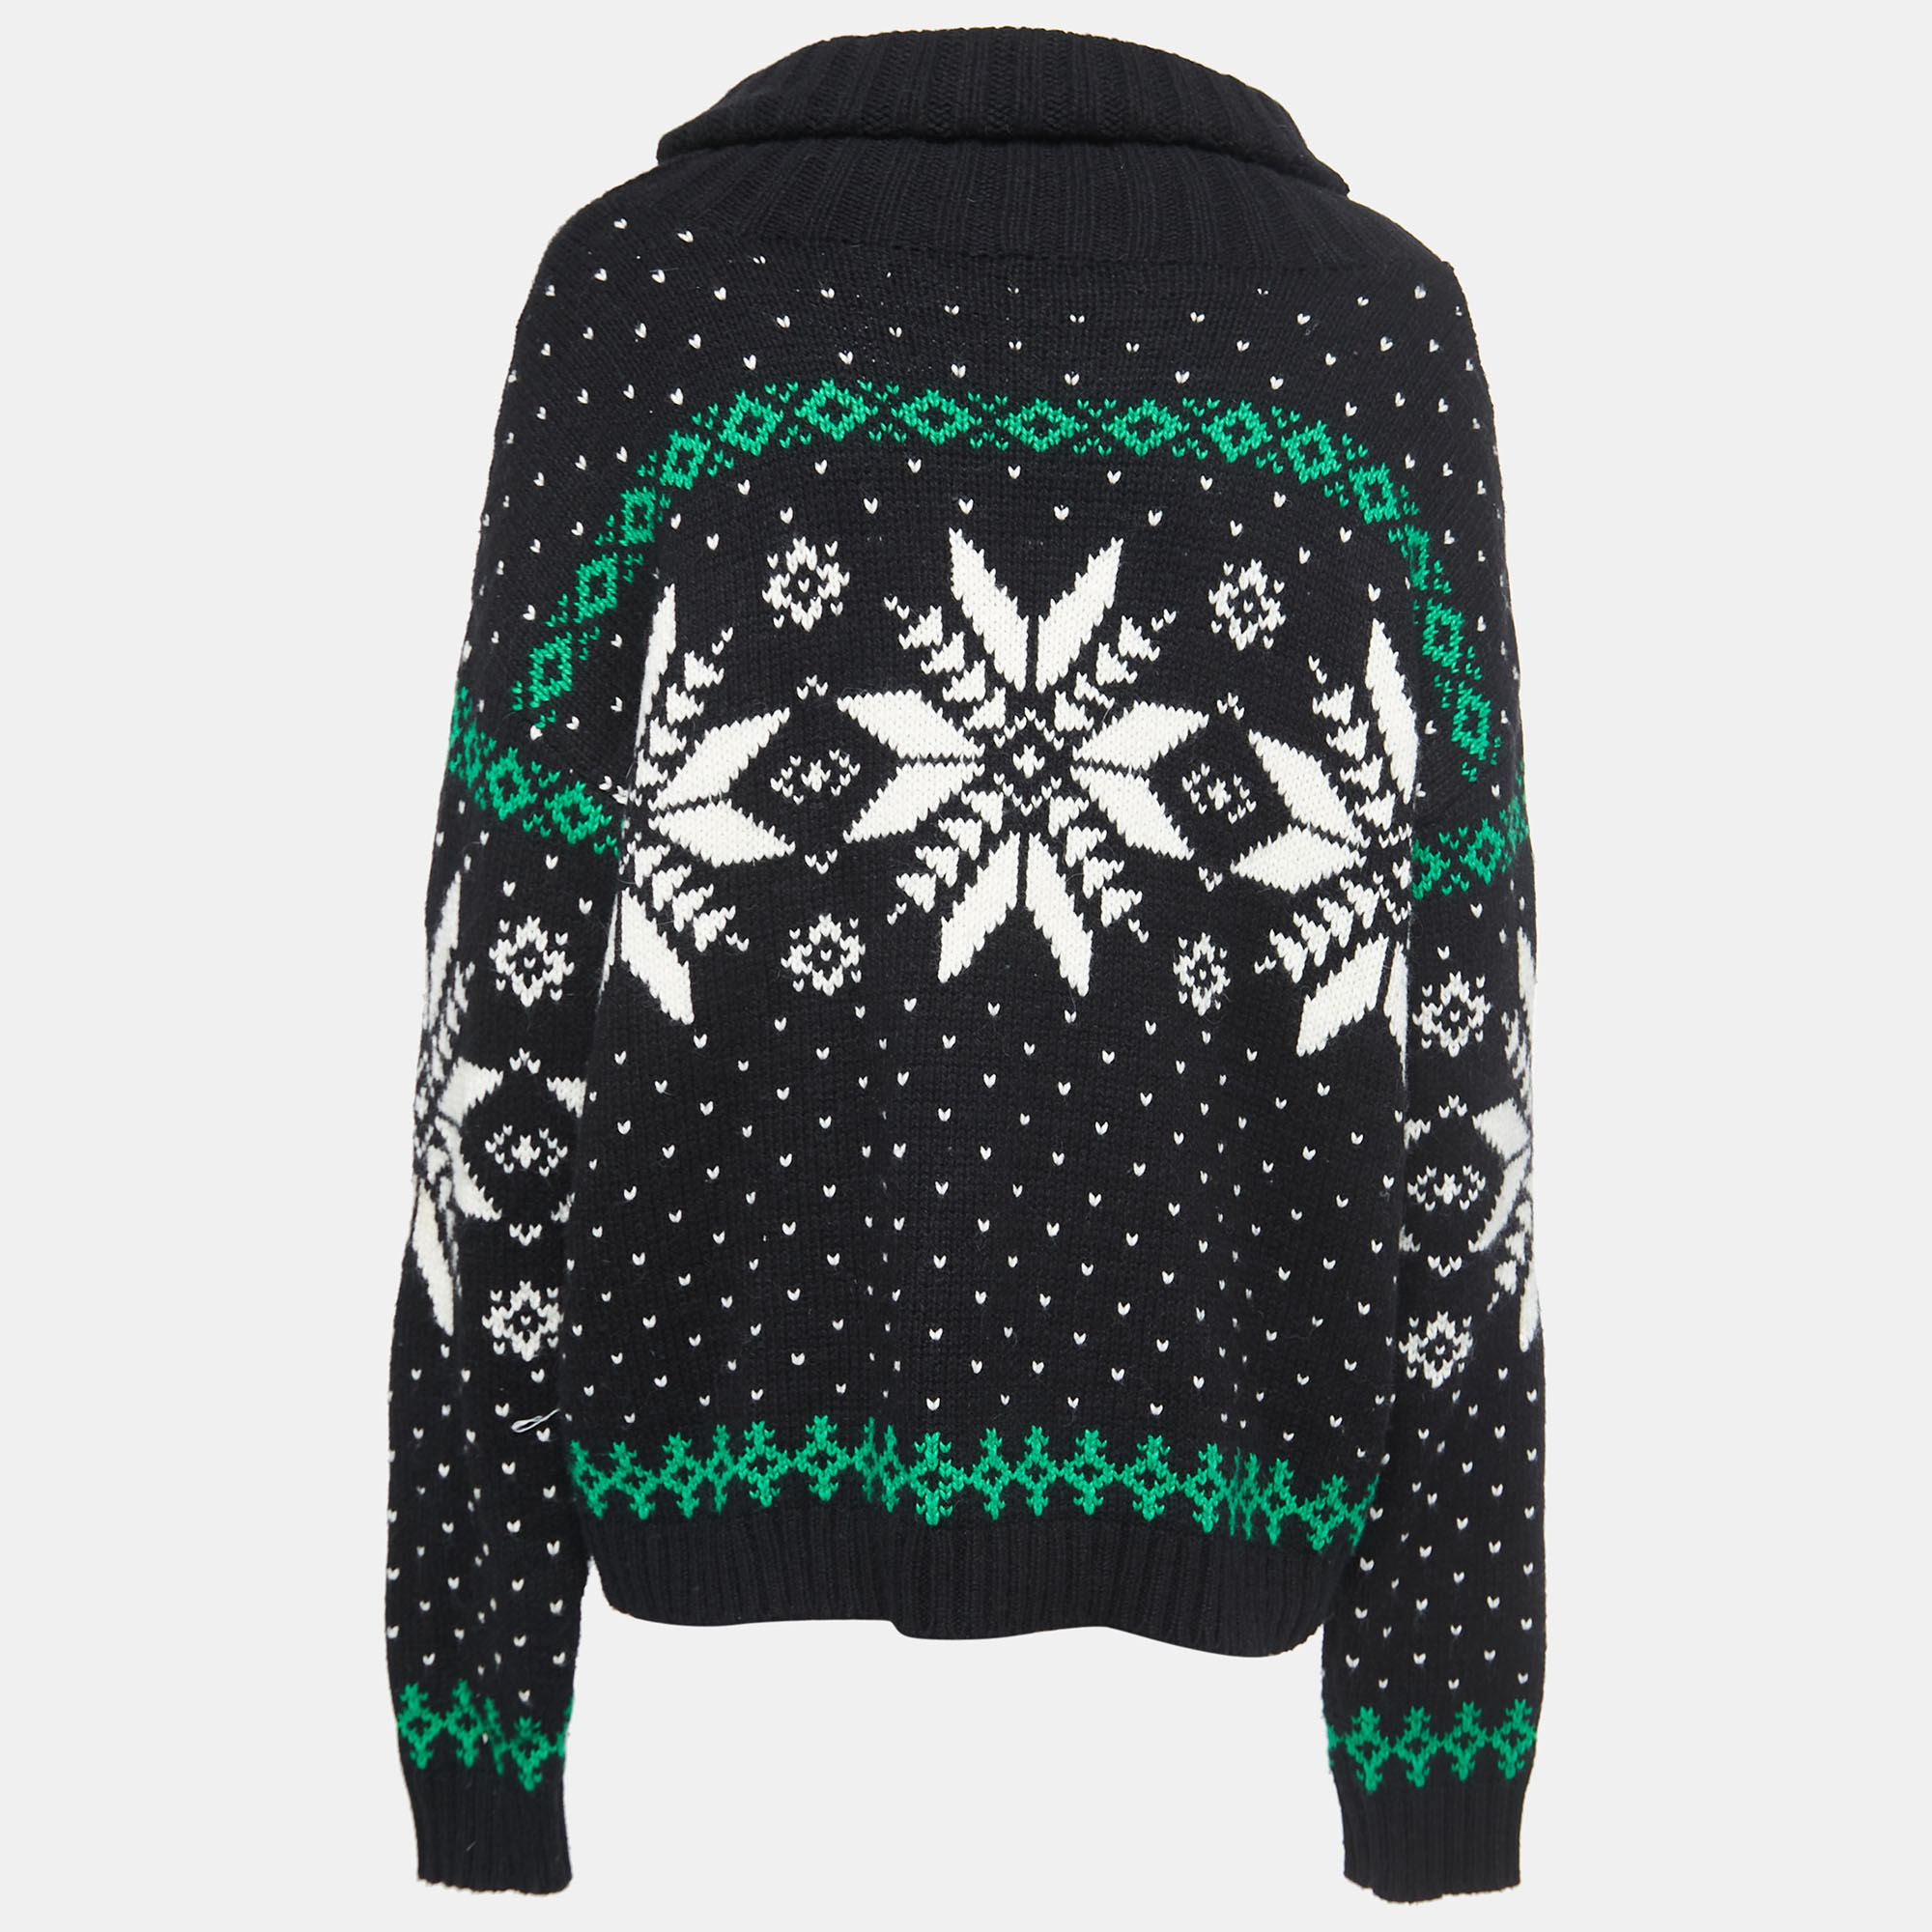 

Polo Ralph Lauren Black Snow Flake Patterned Knit Turtle Neck Sweater